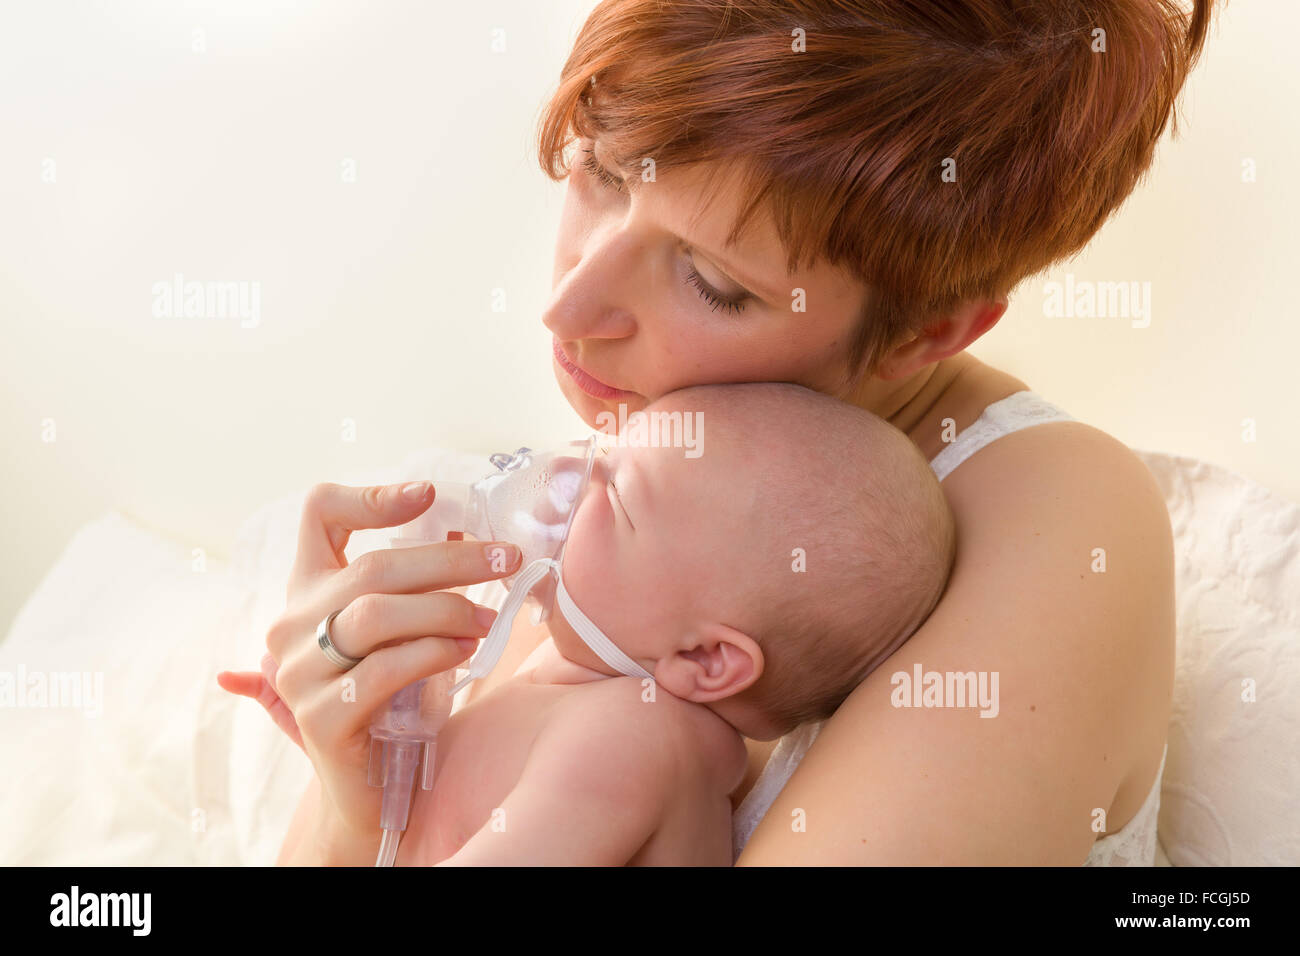 Sick baby of 7 weeks old getting treatment with nebuliser or aerosol Stock Photo